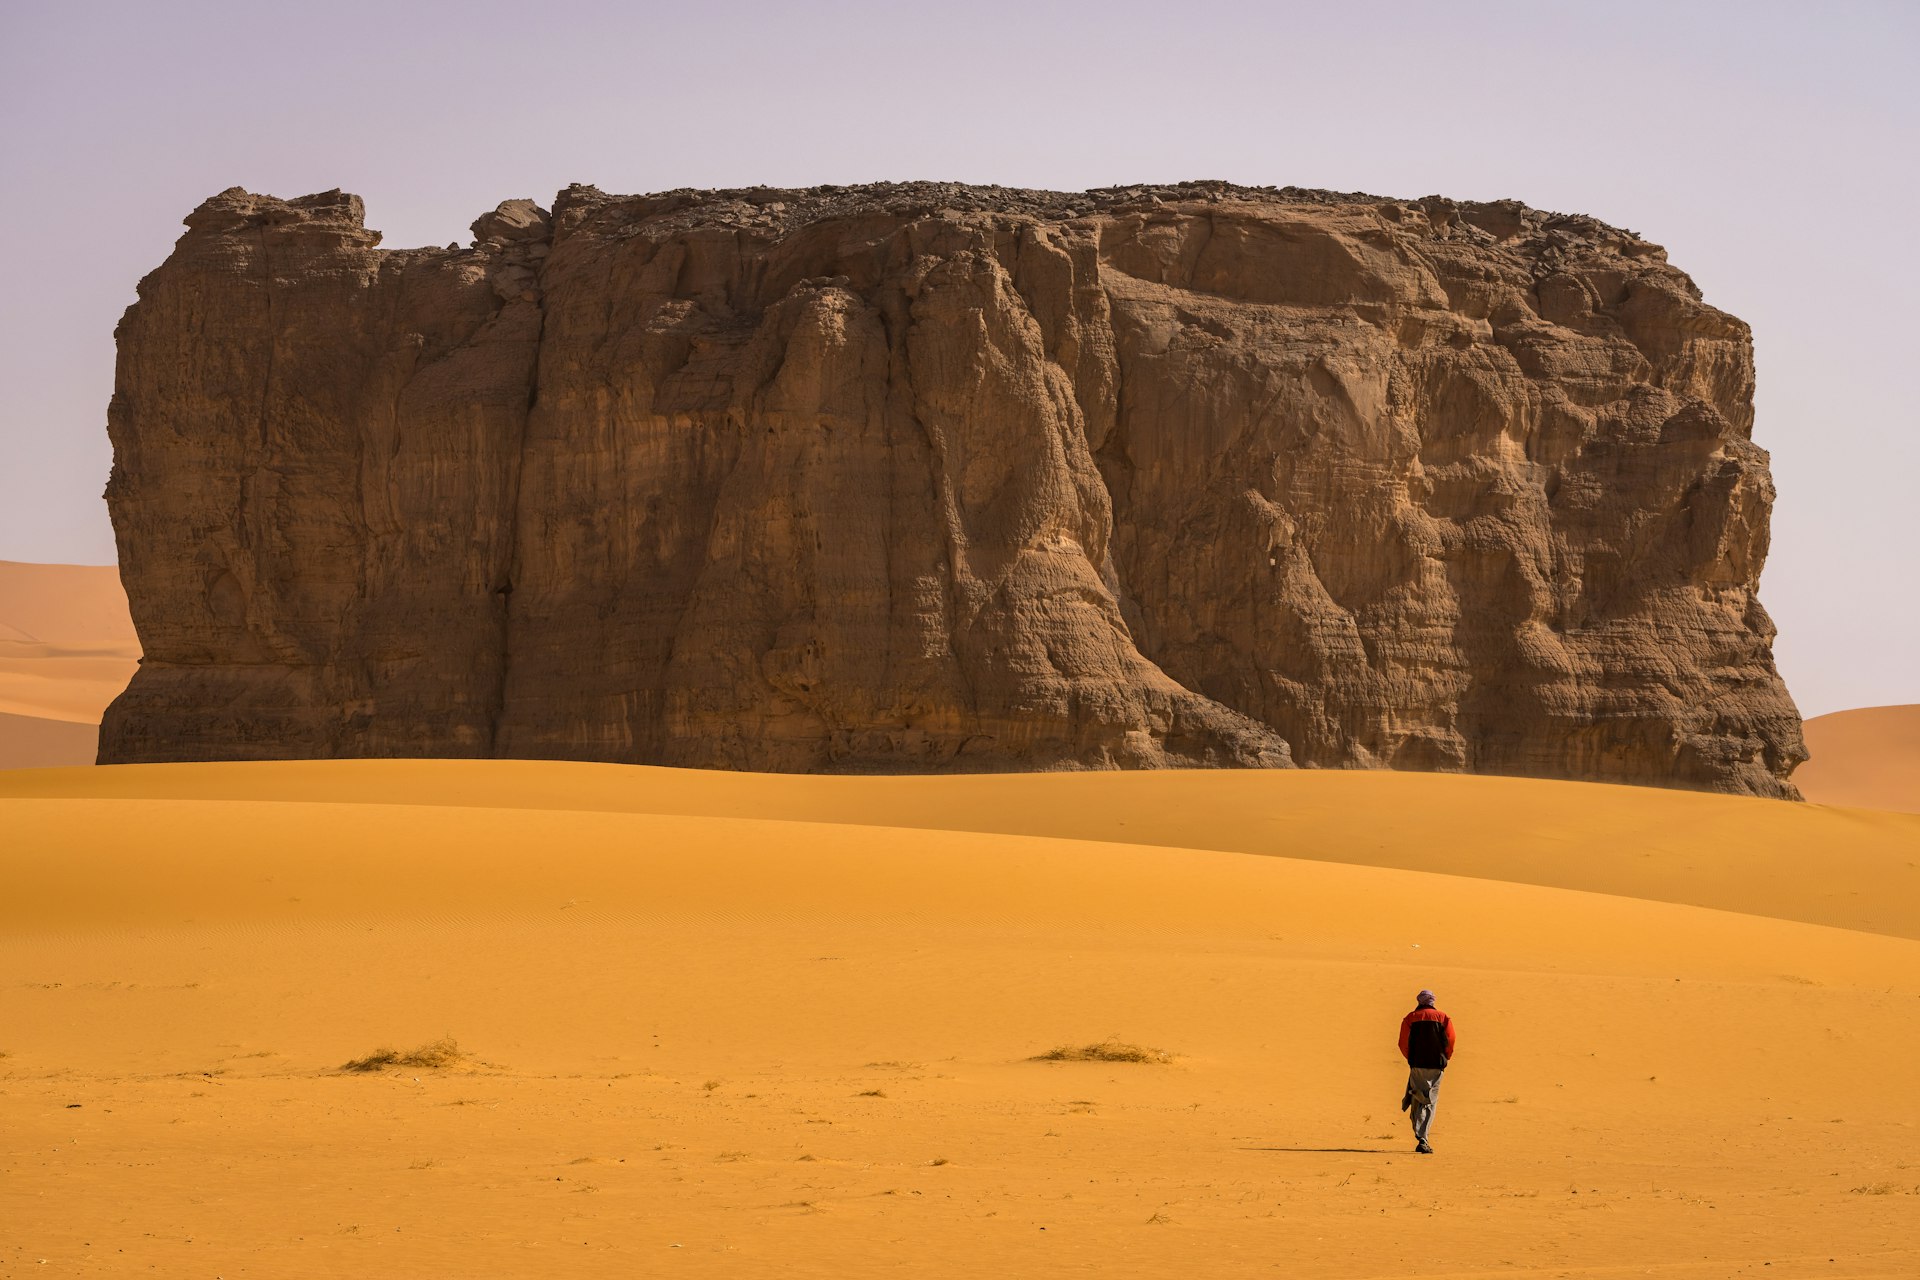 Abdessalam in front of a rock plateau in Tassili National Park